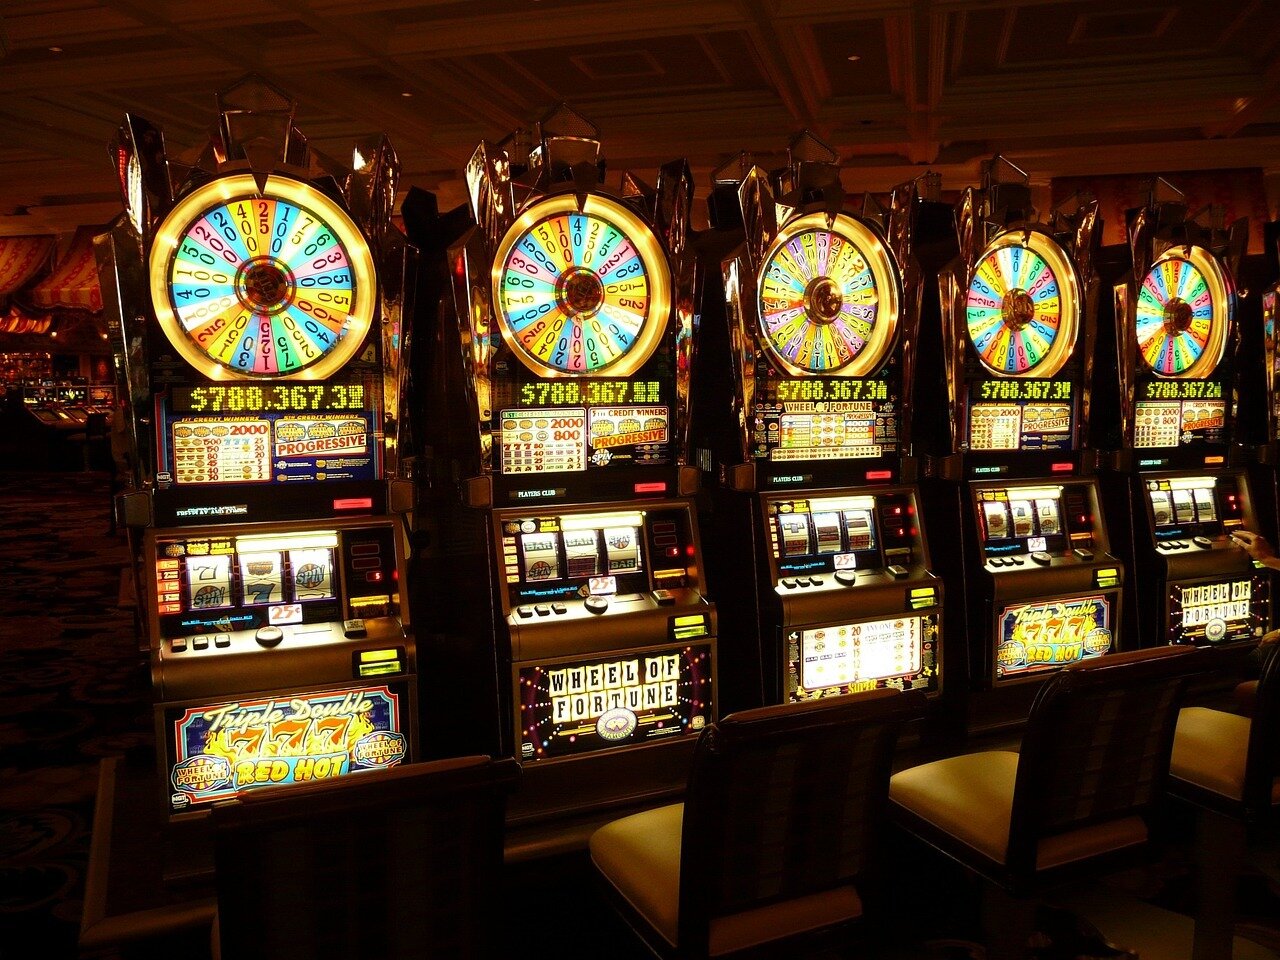 A row of Traditional slot machines